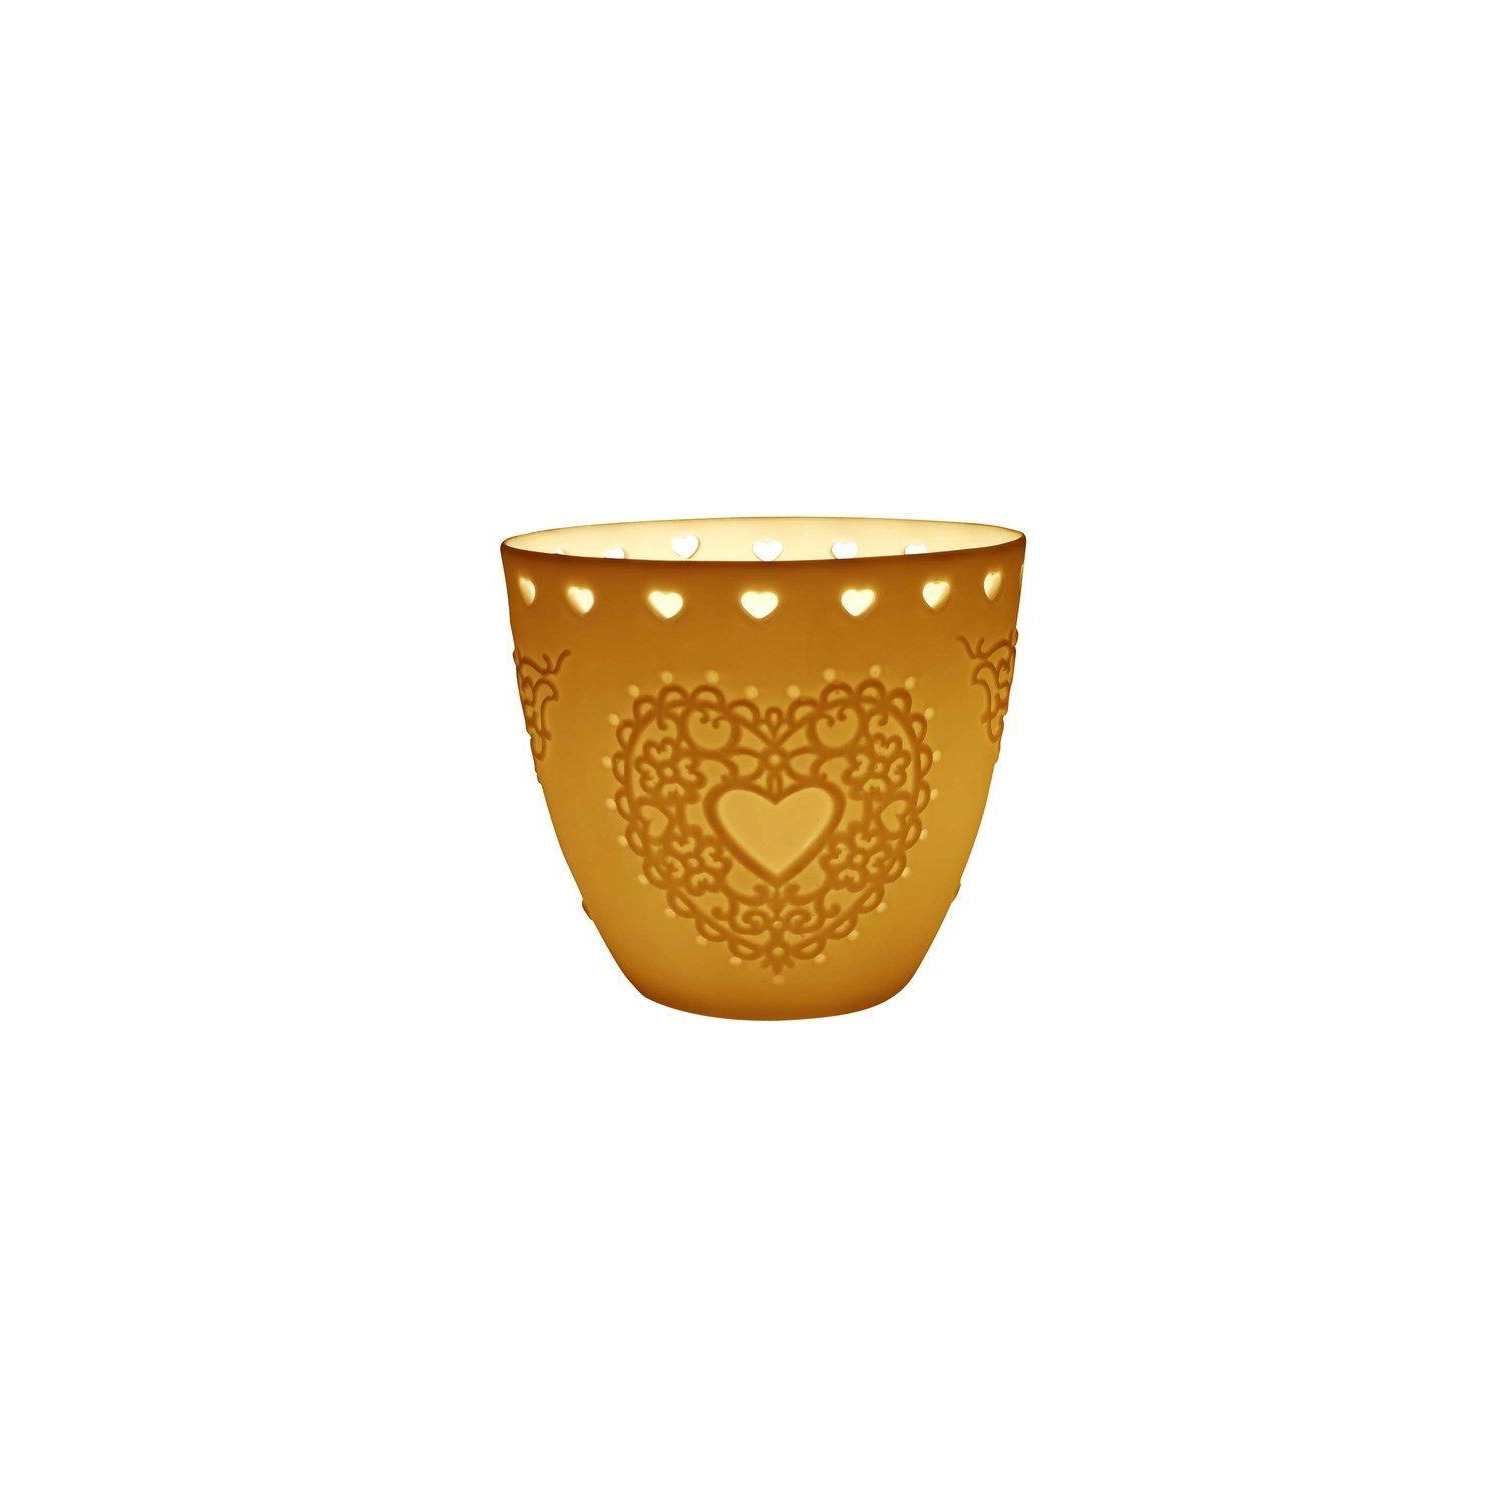 Light-Glow Heart Lithophane Tealight Candle Holder Cup - image 1